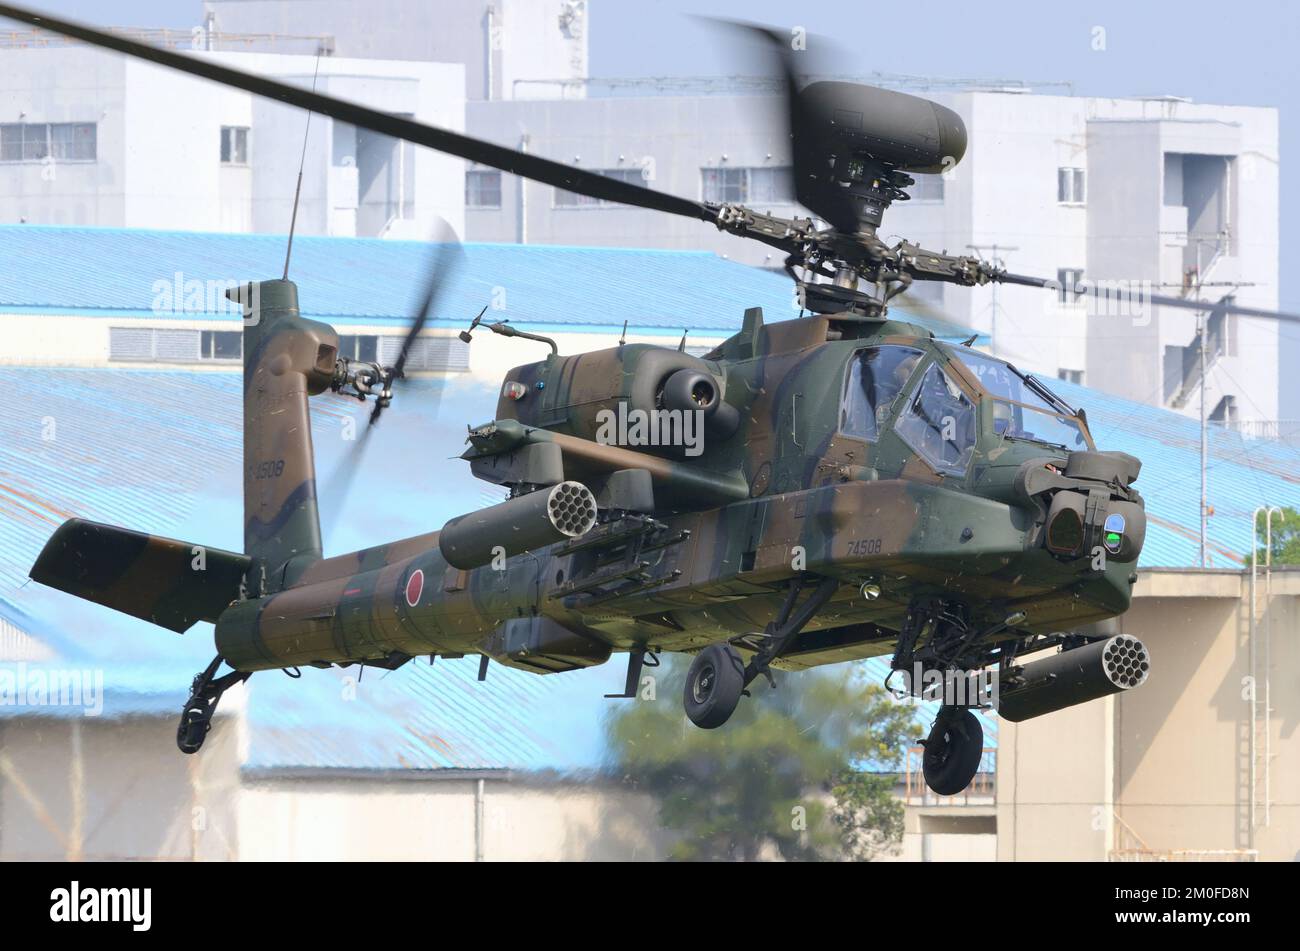 Ibaraki Prefecture, Japan - May 17, 2015: Japan Ground Self-Defense Force Boeing AH-64D Apache Longbow attack helicopter. Stock Photo